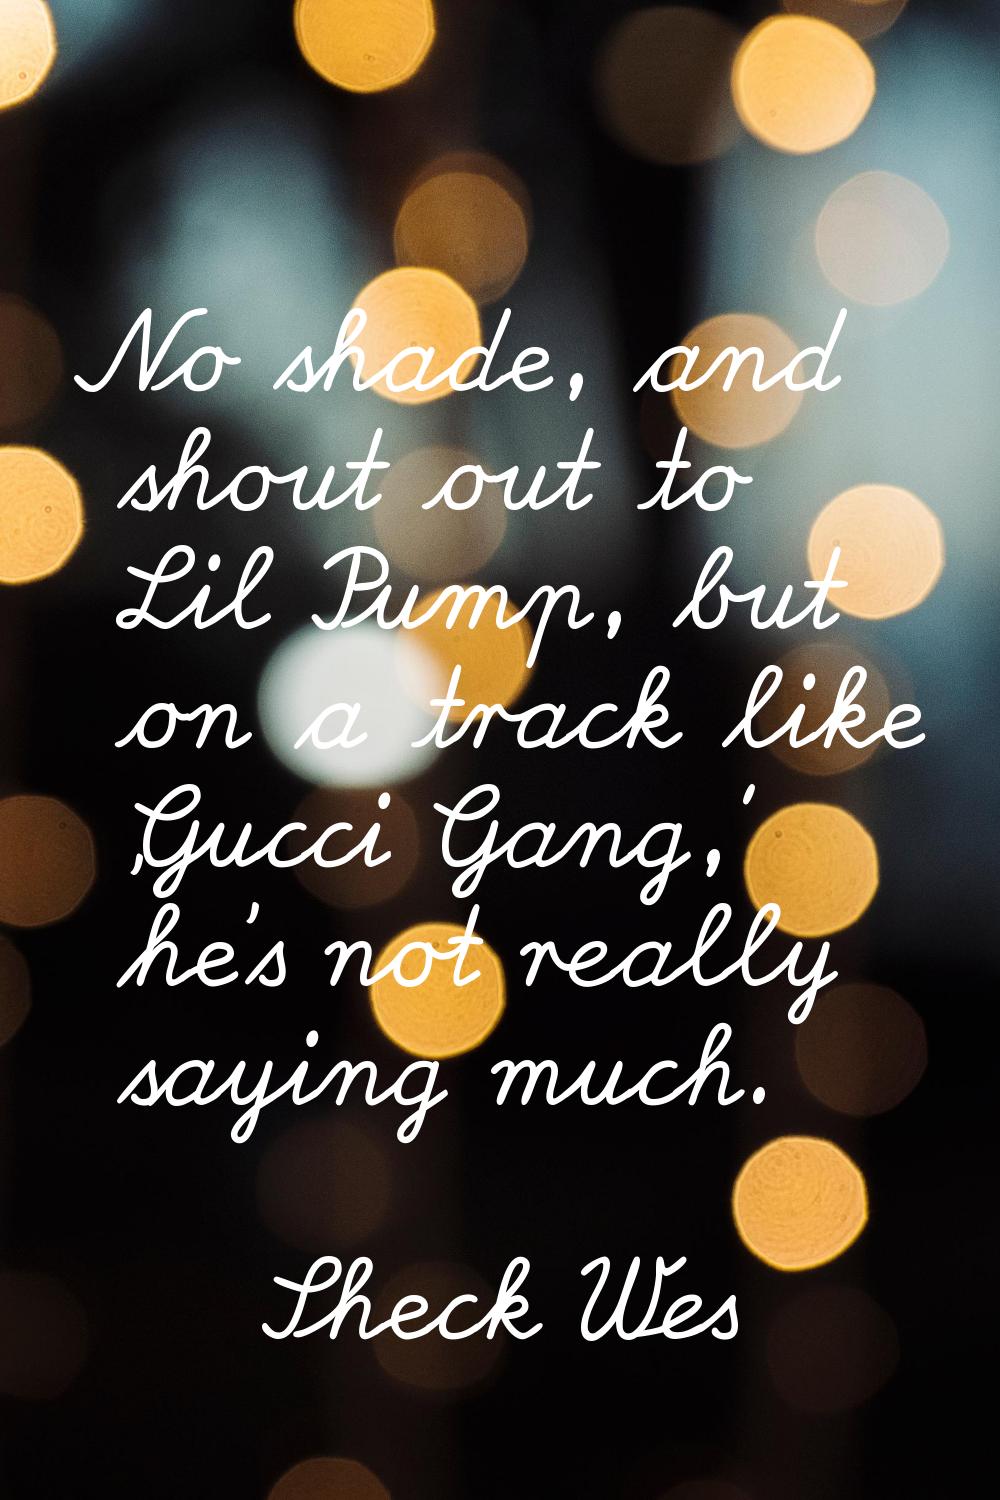 No shade, and shout out to Lil Pump, but on a track like 'Gucci Gang,' he's not really saying much.